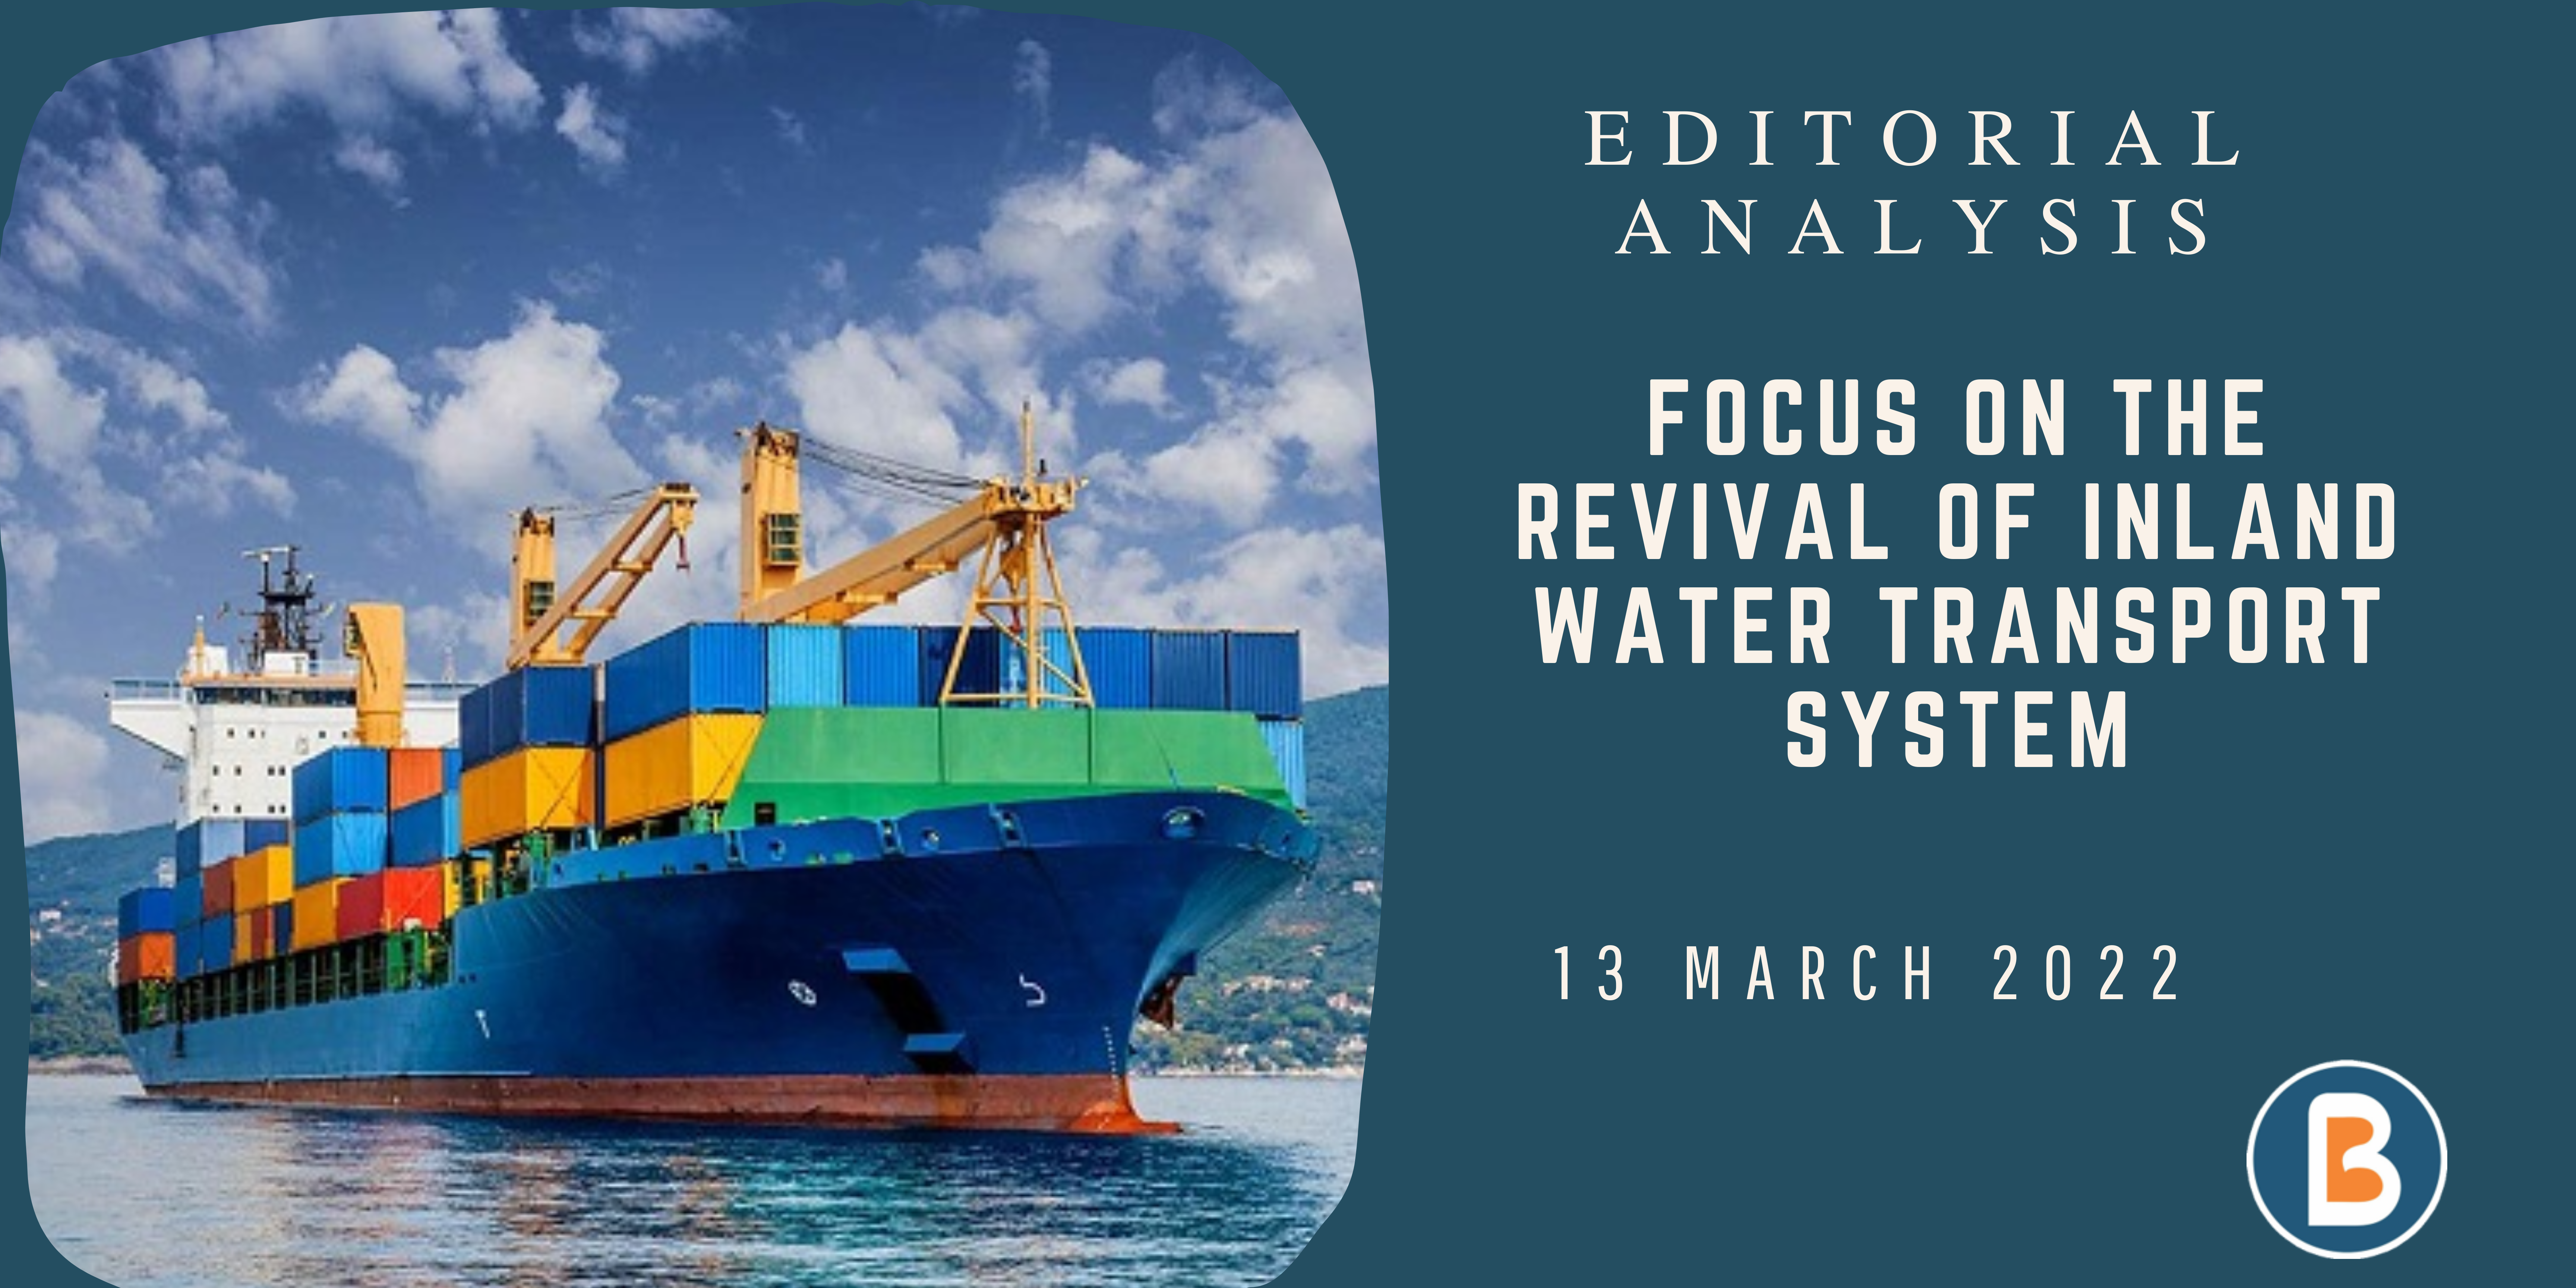 Editorial Analysis for UPSC - Focus on the Revival of Inland Water Transport System